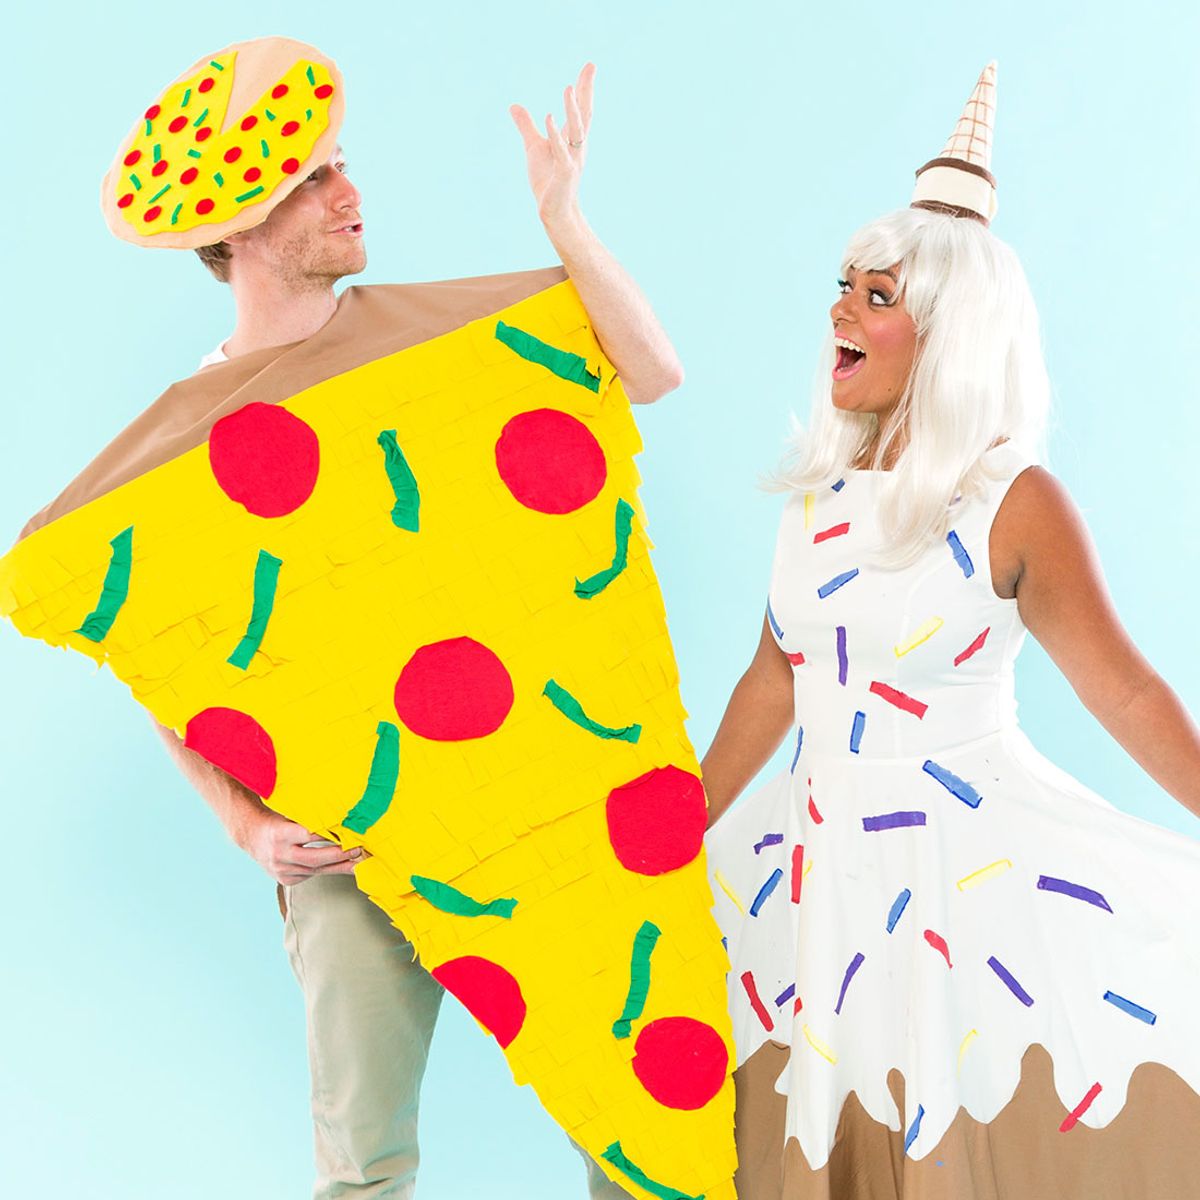 50+ Uplifting Halloween Costumes to Make You Feel Good This Weird, Weird Year